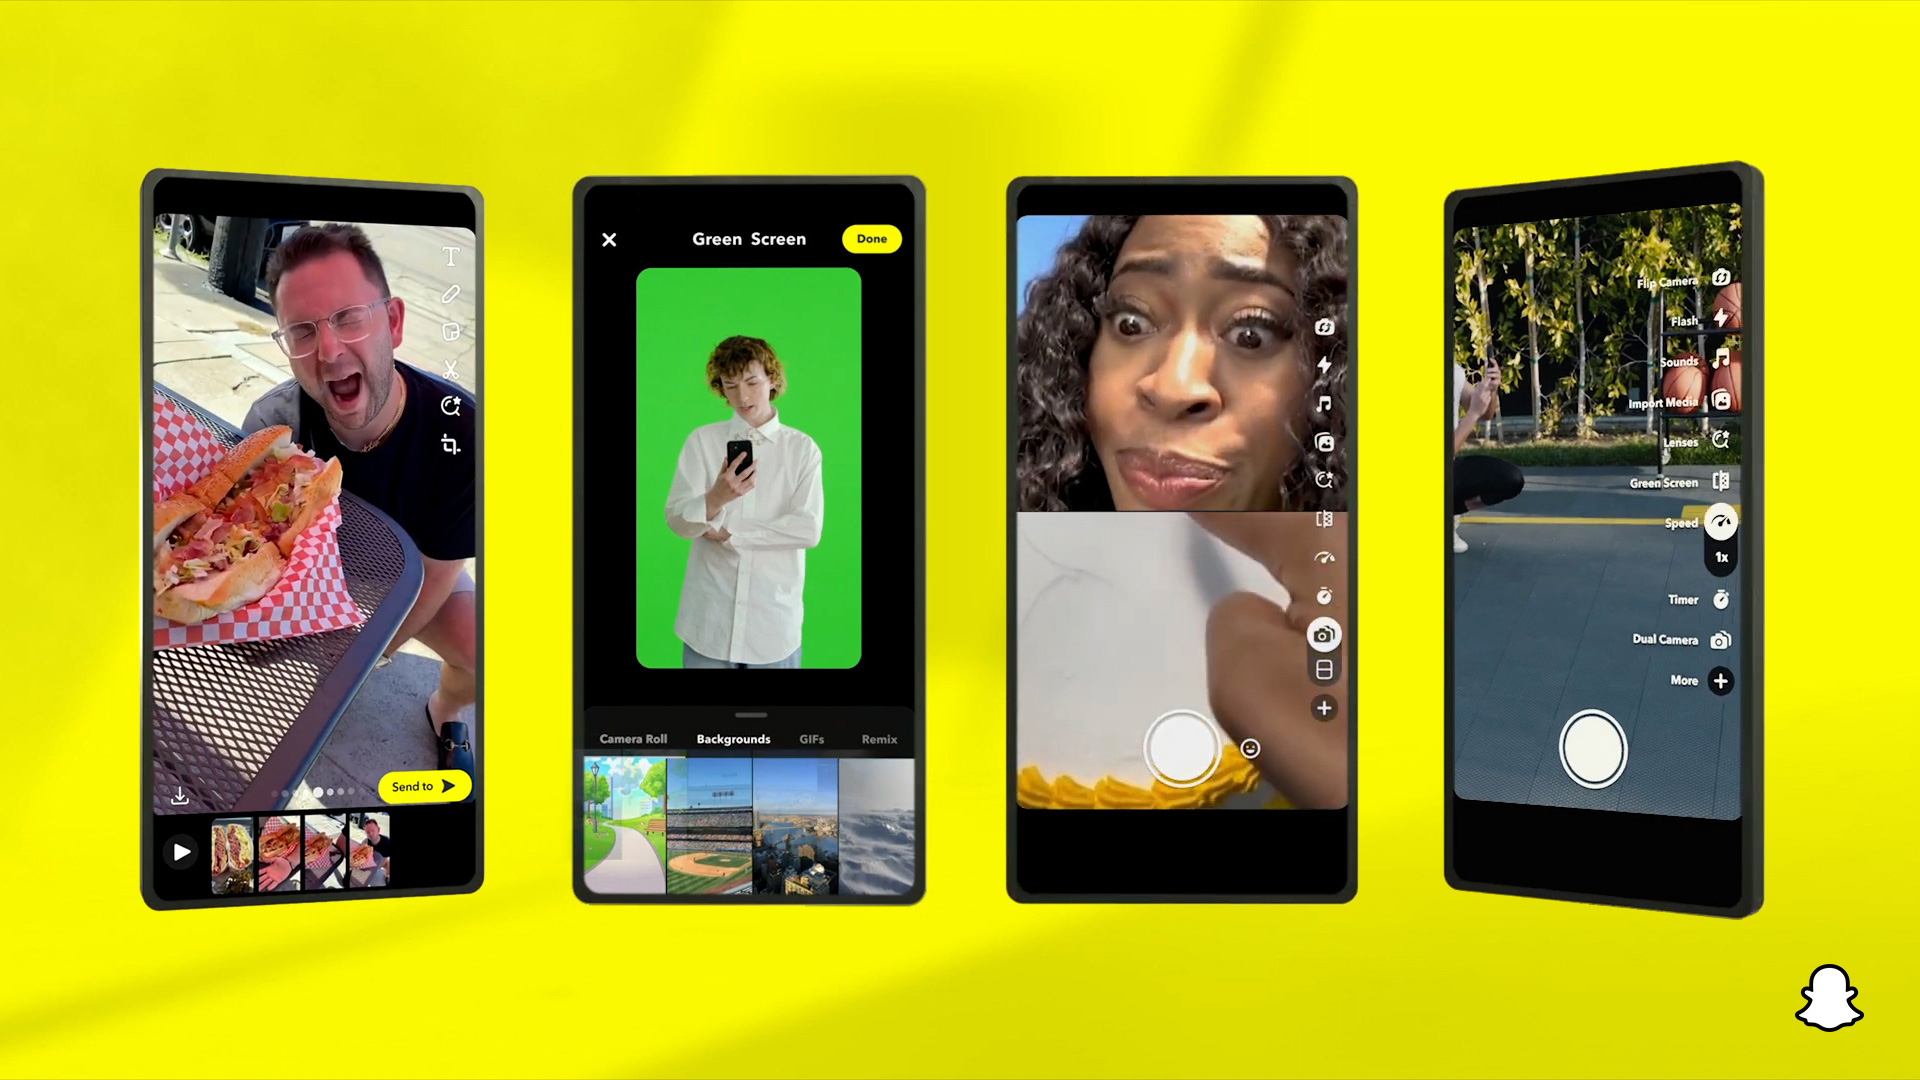 Snapchat’s ‘Director Mode’ editing tools are finally ready to use